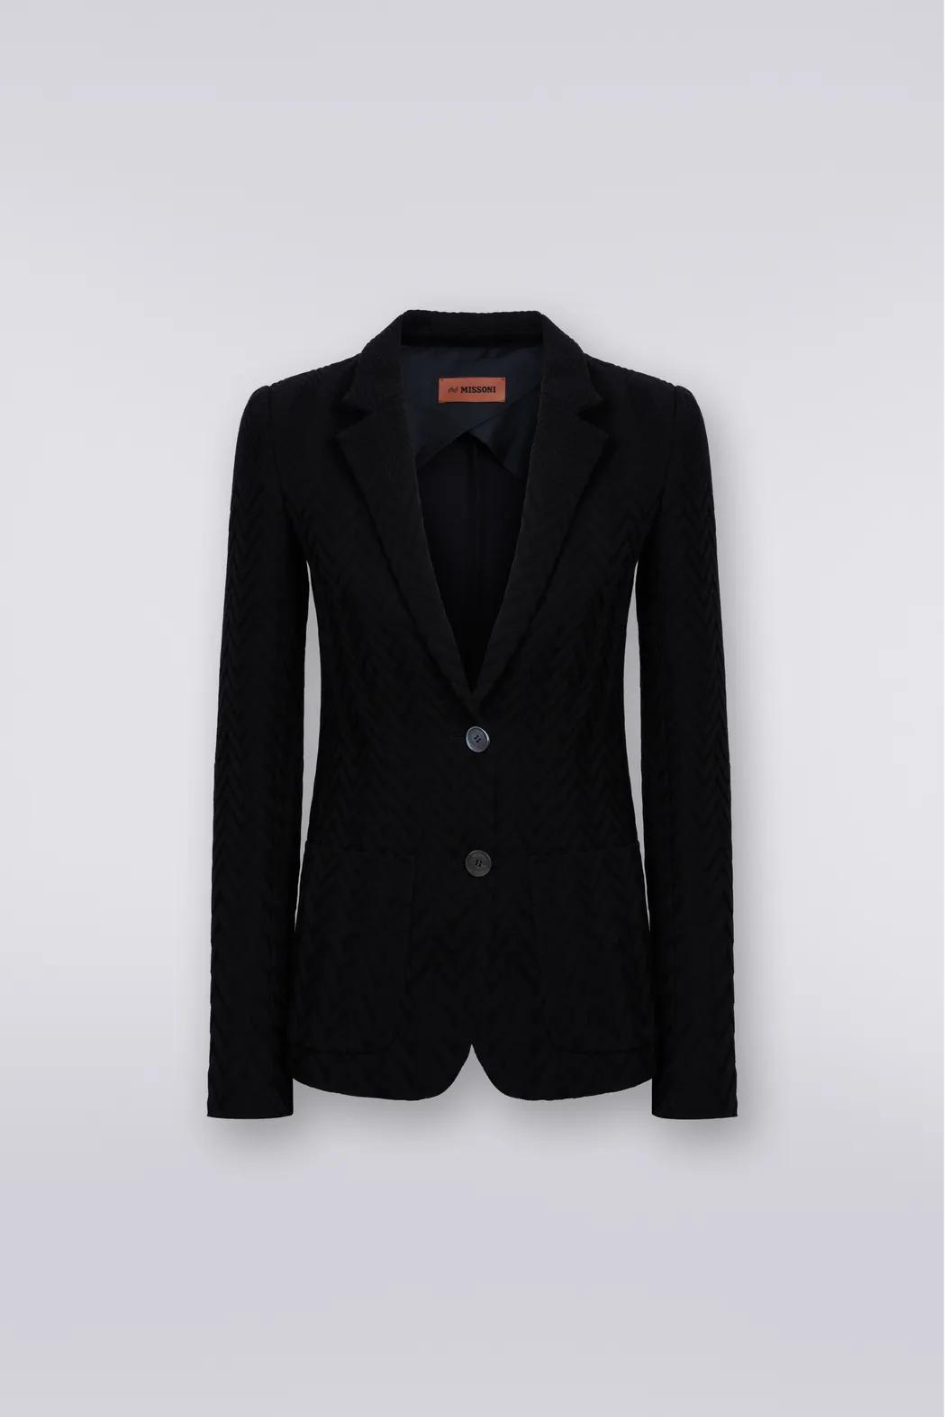 Hand Knitted Blazer with Lapel Collar